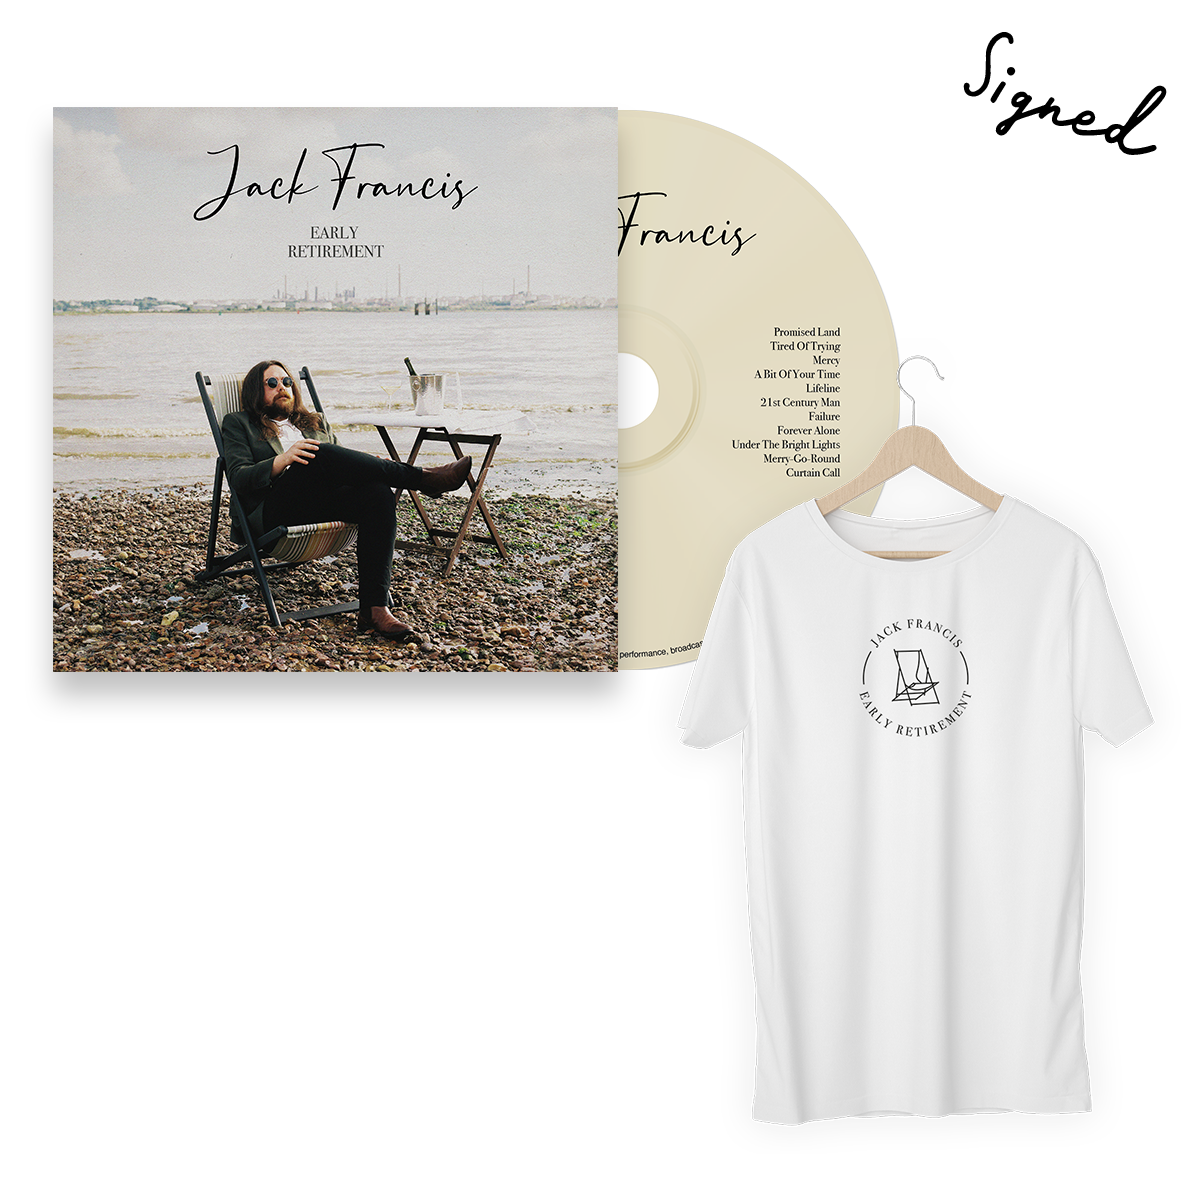 EARLY RETIREMENT SIGNED CD + T-SHIRT BUNDLE